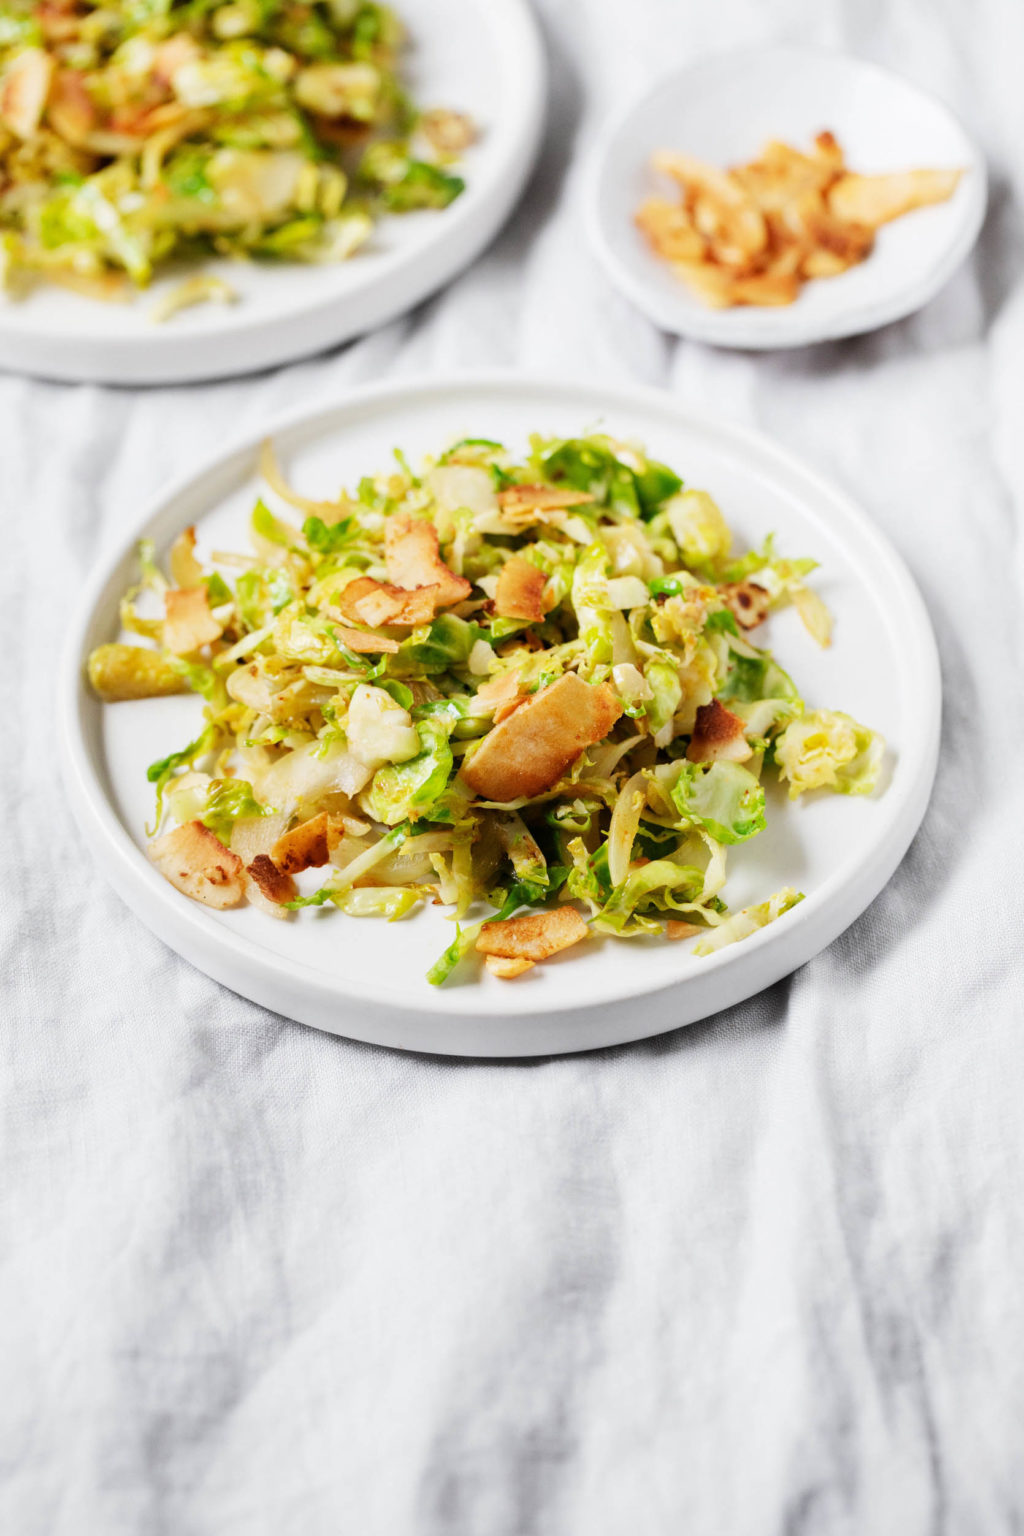 Several small, white side plates are topped with a plant-based hash, made with shaved Brussels sprouts.